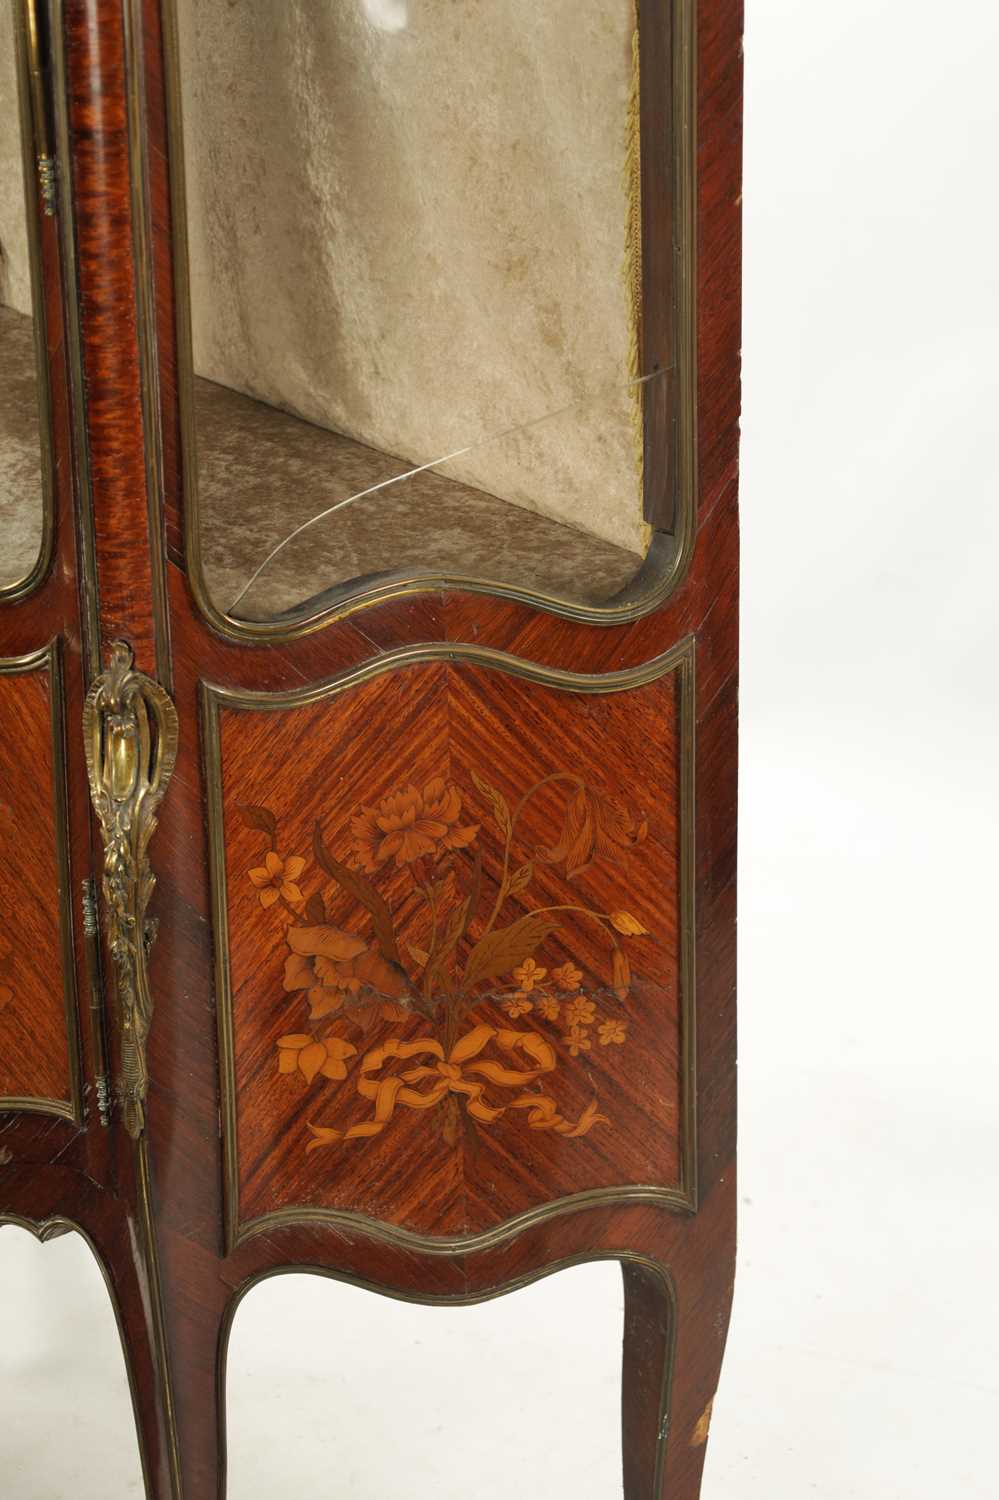 A 19TH CENTURY MARQUETRY INLAID ROSEWOOD RENE MARTIN DISPLAY CABINET / VITRENE - Image 8 of 9